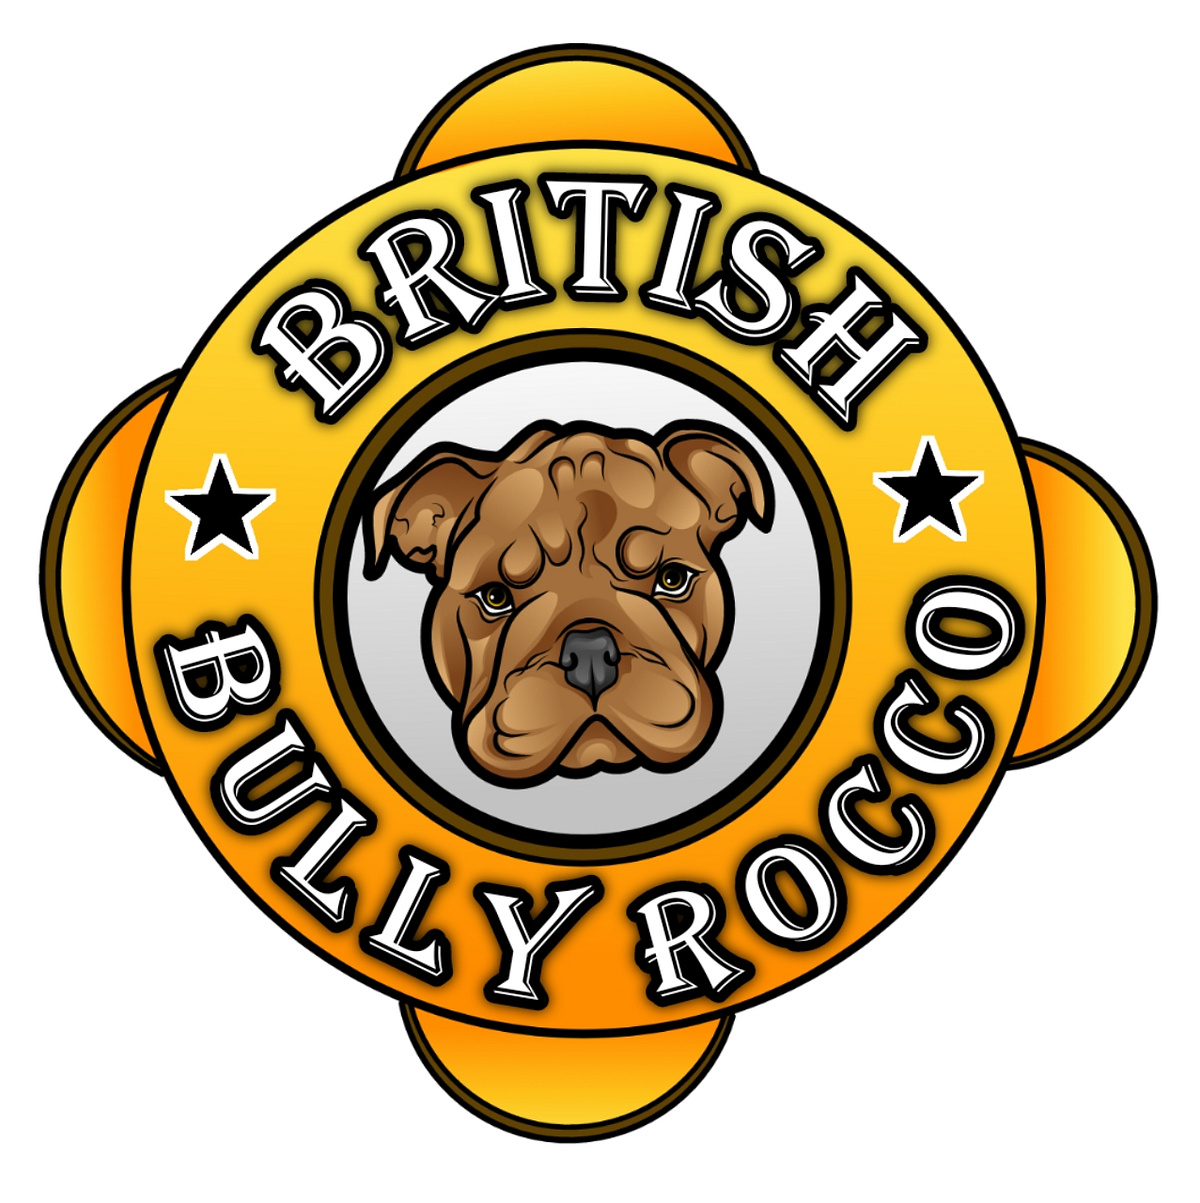 Bully logo by Agbo Ifeanyi Nobert on Dribbble